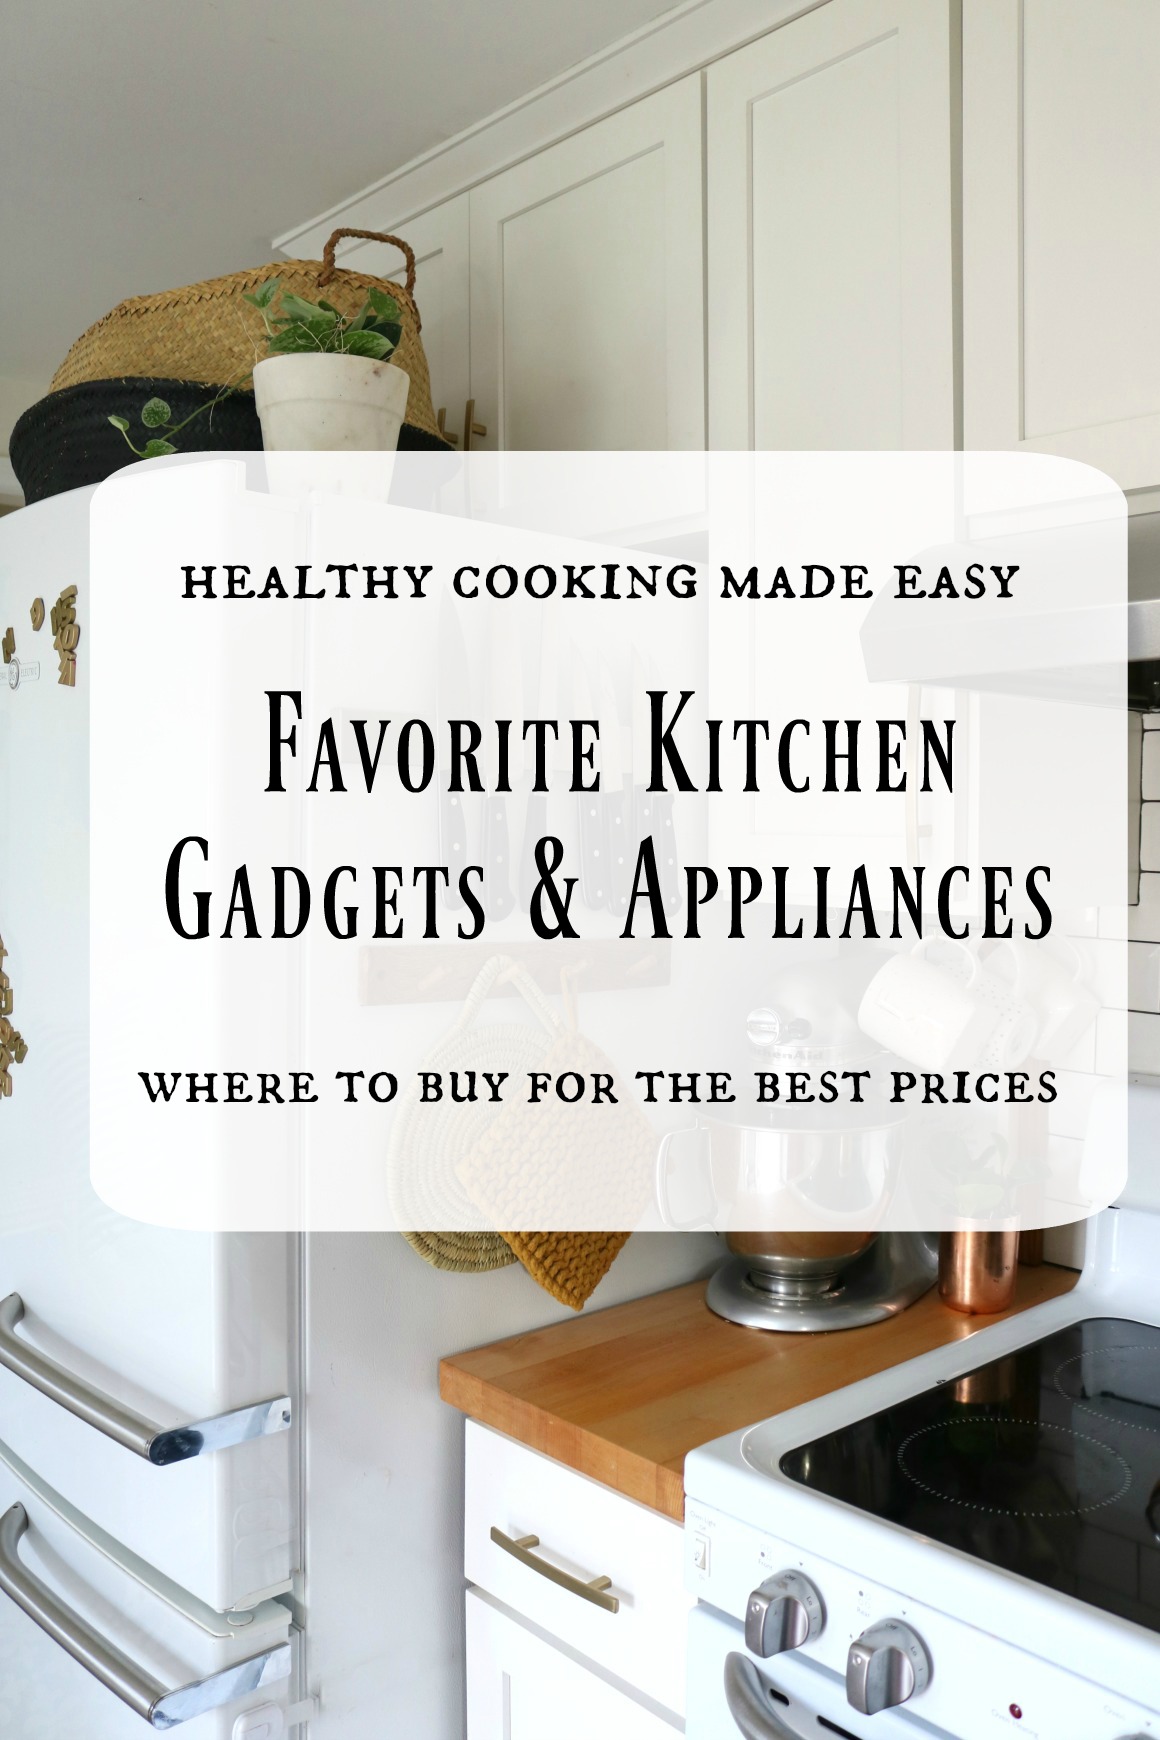 https://nestingwithgrace.com/wp-content/uploads/2018/09/Must-have-Small-Kitchen-Appliances-Kithcen-Gadgets-from-Ebay-Wedding-Regristry-Ideas-Healthy-Recipes-Gadgets-for-Whole30-05.22.jpg